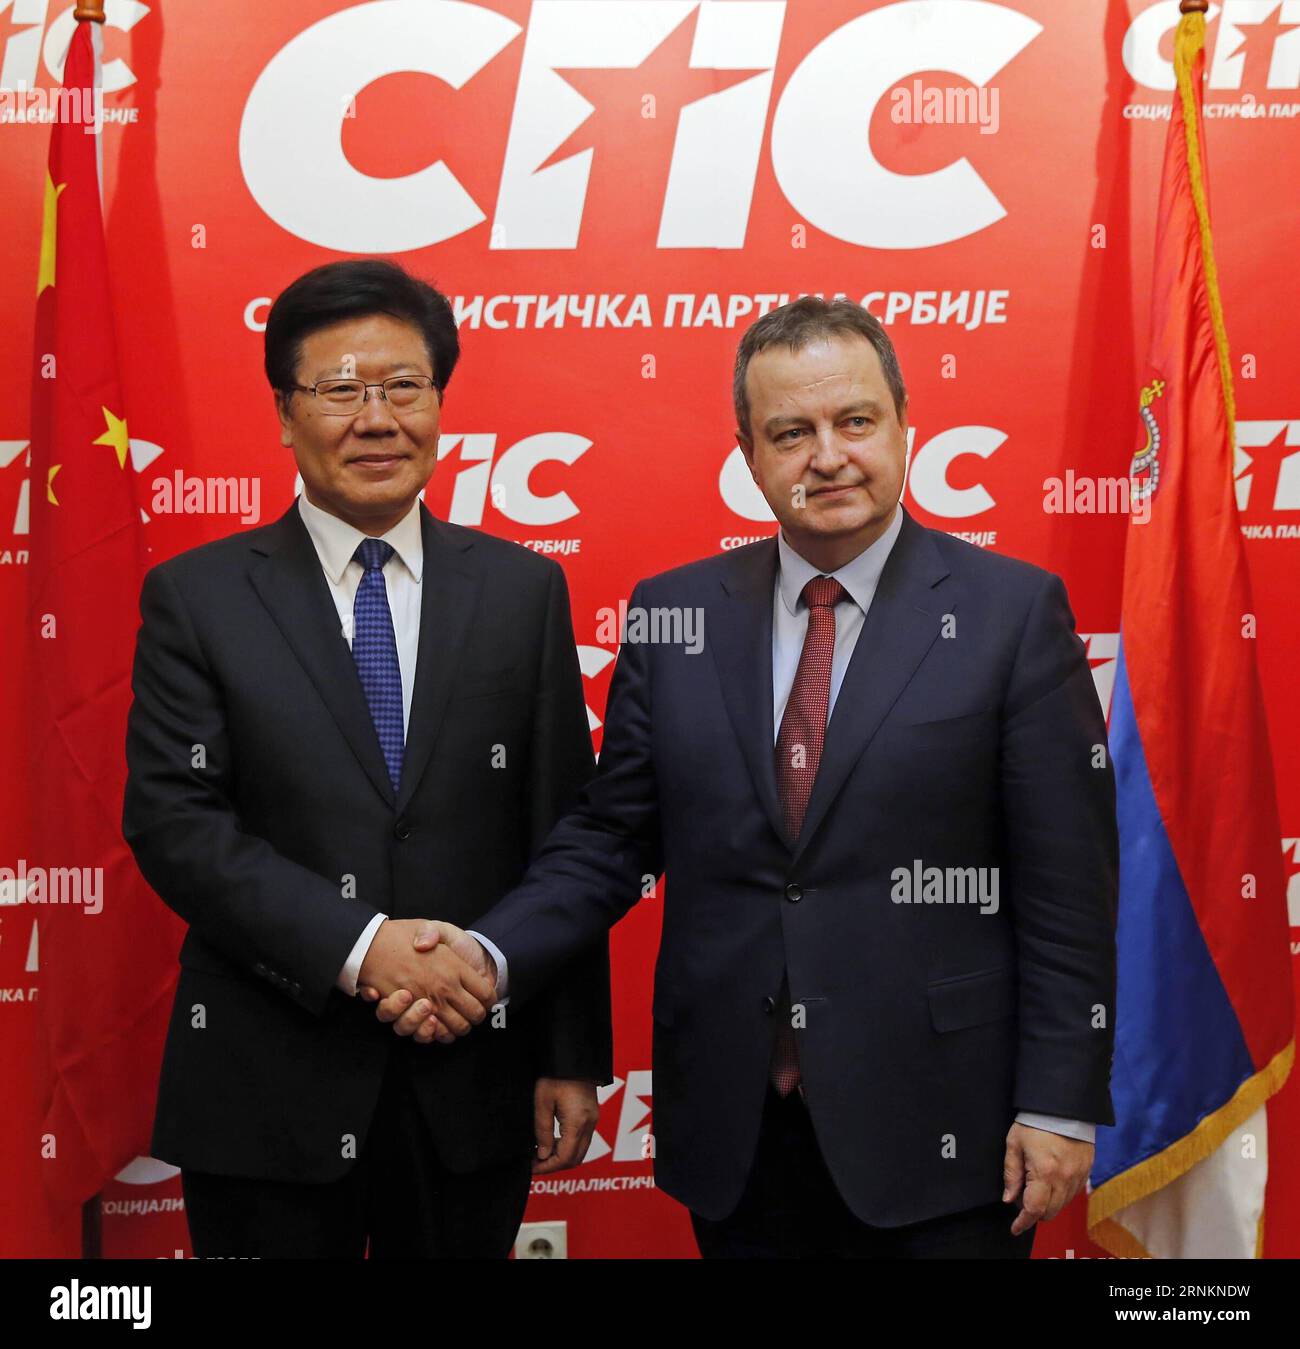 (170413) -- BELGRADE, April 13, 2017 -- Zhang Chunxian (L), member of the Political Bureau of the Communist Party of China (CPC) Central Committee, meets with Serbian Foreign Minister and the leader of the Socialist Party Ivica Dacic, in Belgrade, Serbia, on April 13, 2017. ) (zf) SERBIA-BELGRADE-CHINA-POLITICS-MEETING PredragxMilosavljevic PUBLICATIONxNOTxINxCHN   Belgrade April 13 2017 Zhang Chunxian l member of The Political Bureau of The Communist Party of China CPC Central Committee Meets With Serbian Foreign Ministers and The Leader of The Socialist Party Ivica Dacic in Belgrade Serbia O Stock Photo